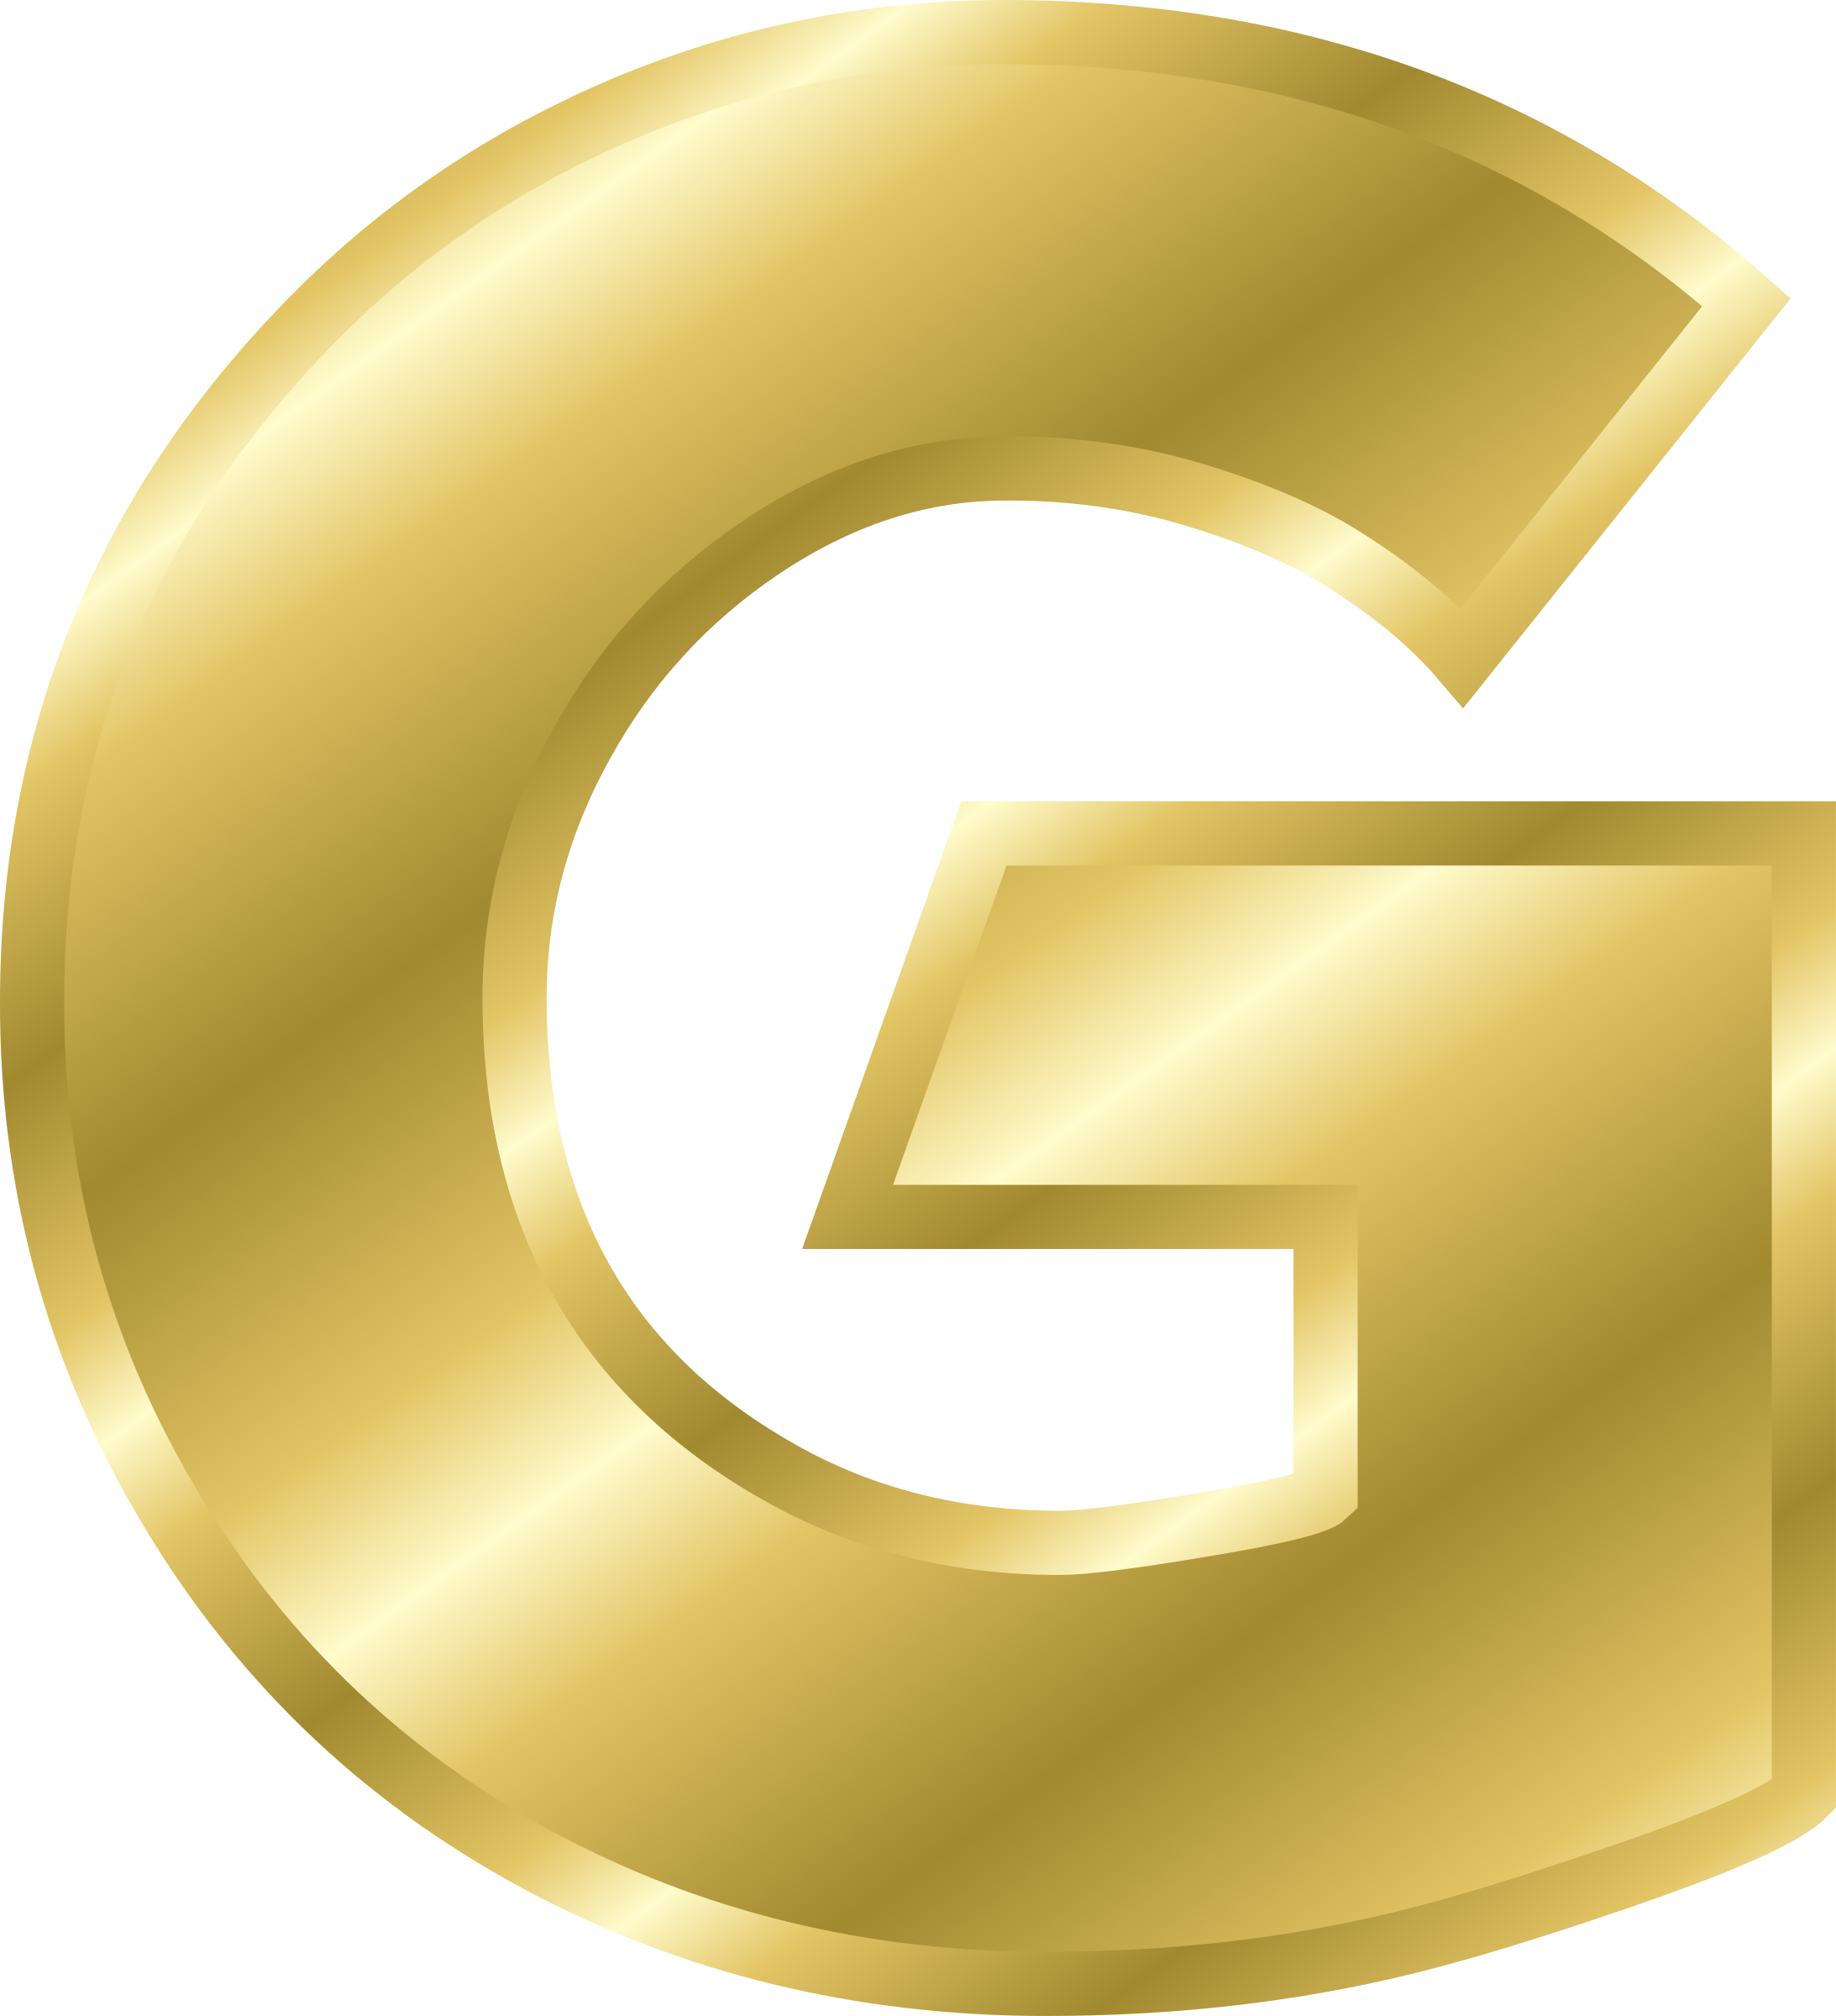 g-letter-png-image-hd-png-all